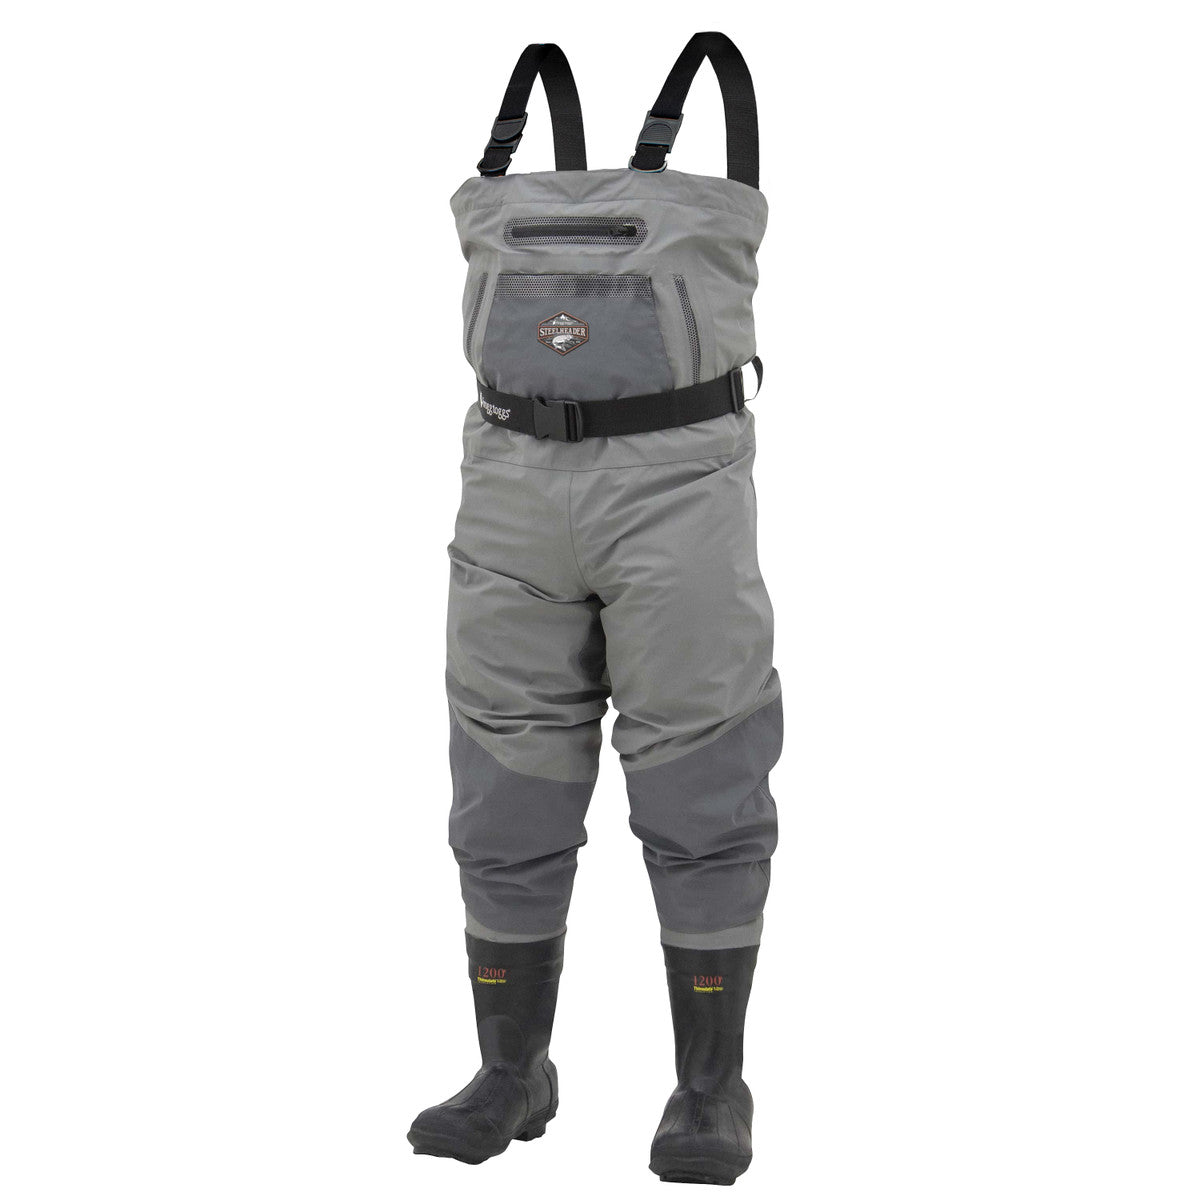 Frog Toggs Steelheader Fishing Waders - insulated, lug sole, size